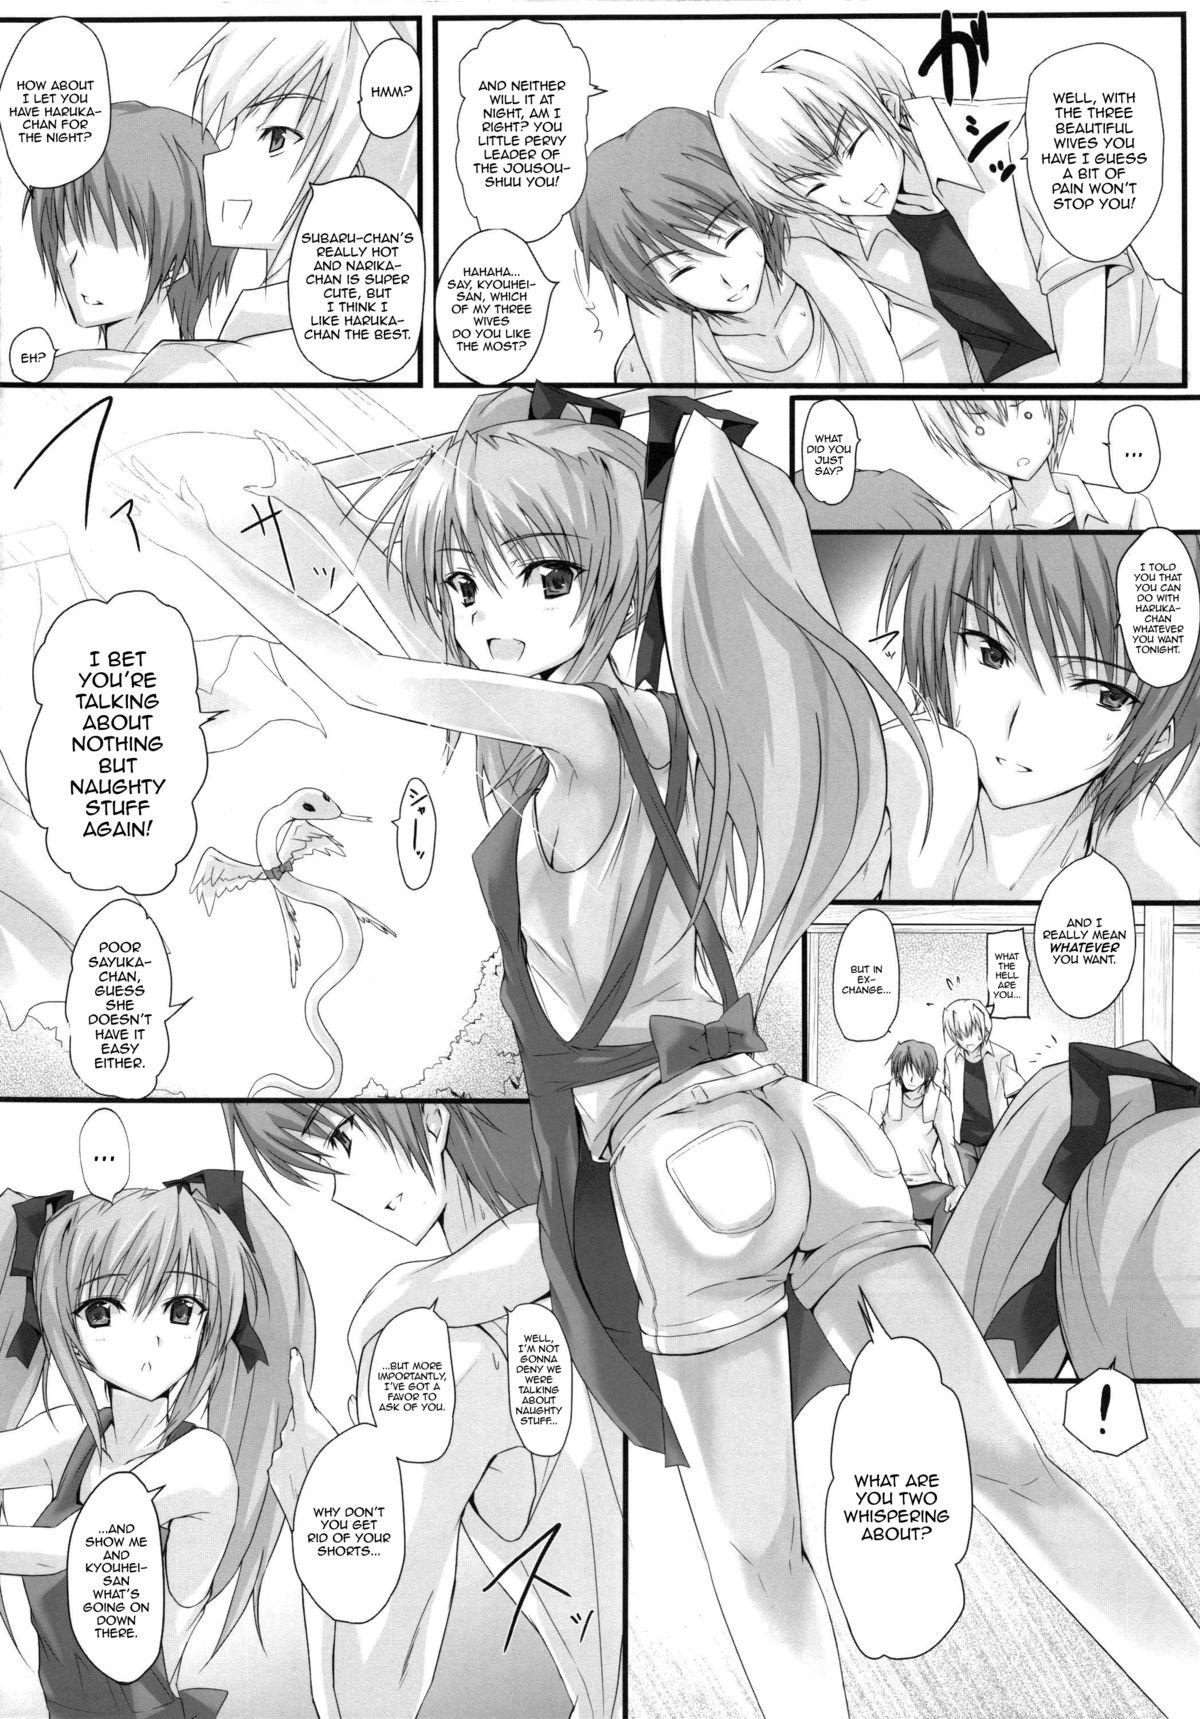 Curious Swapping Beat - Beat angel escalayer Beat blades haruka Blacks - Page 4